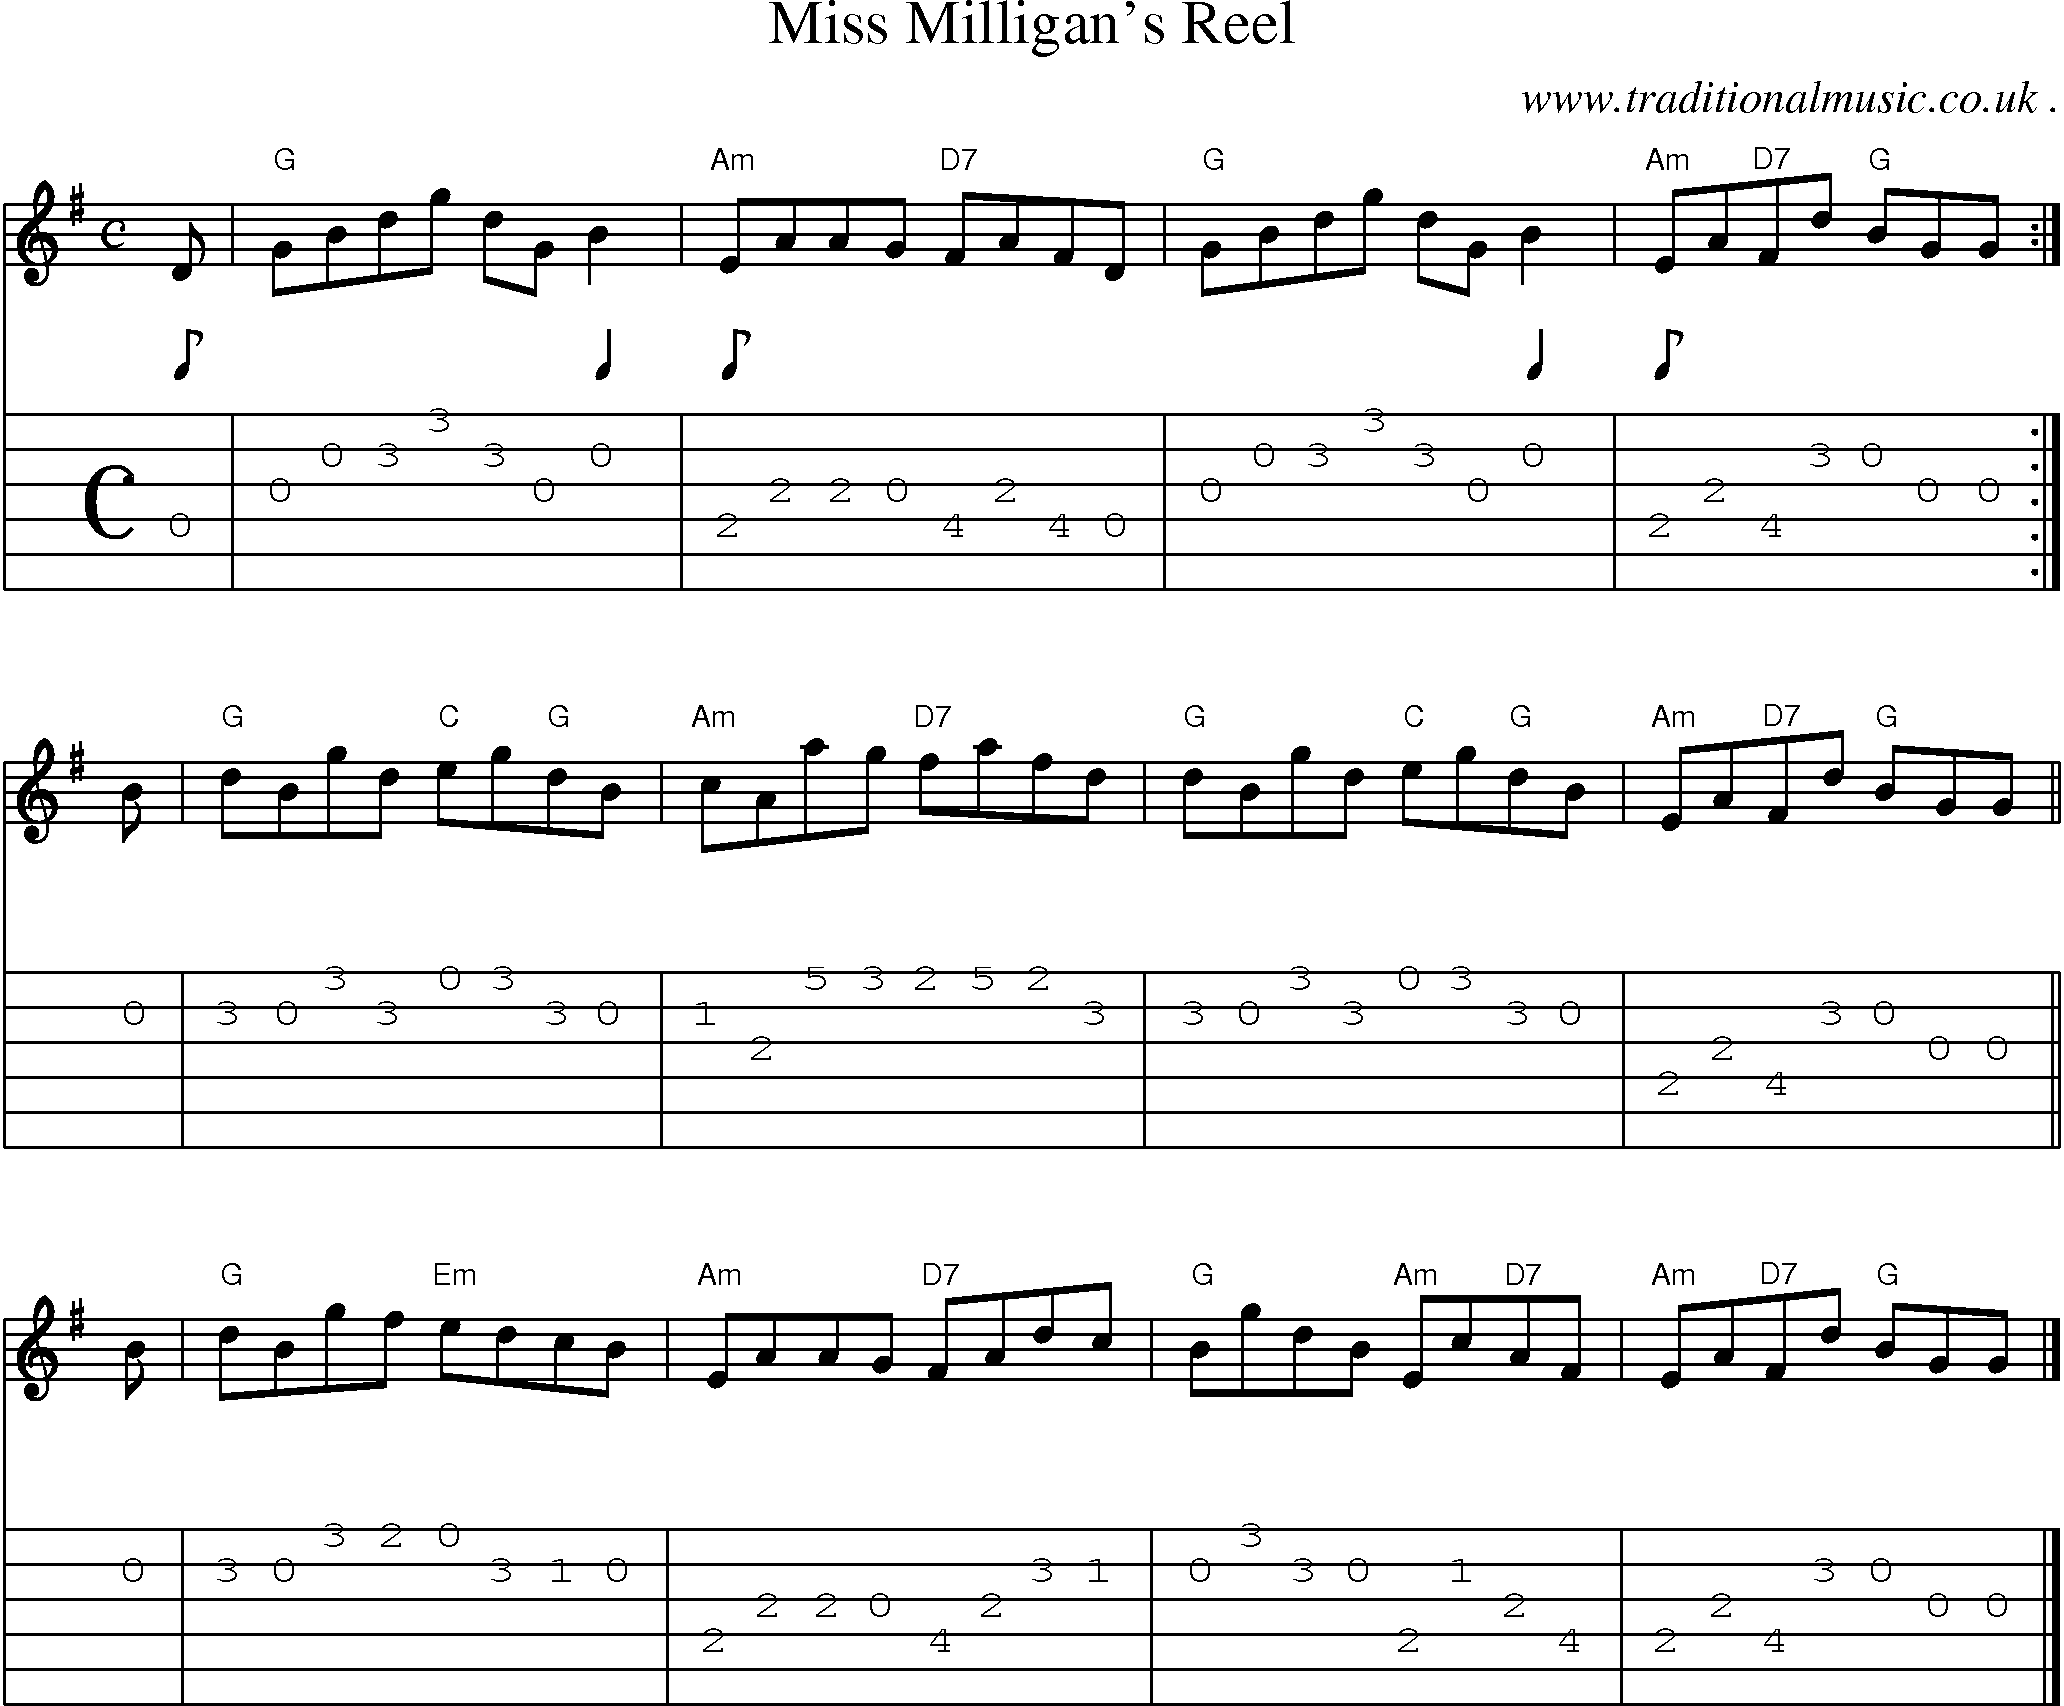 Sheet-music  score, Chords and Guitar Tabs for Miss Milligans Reel